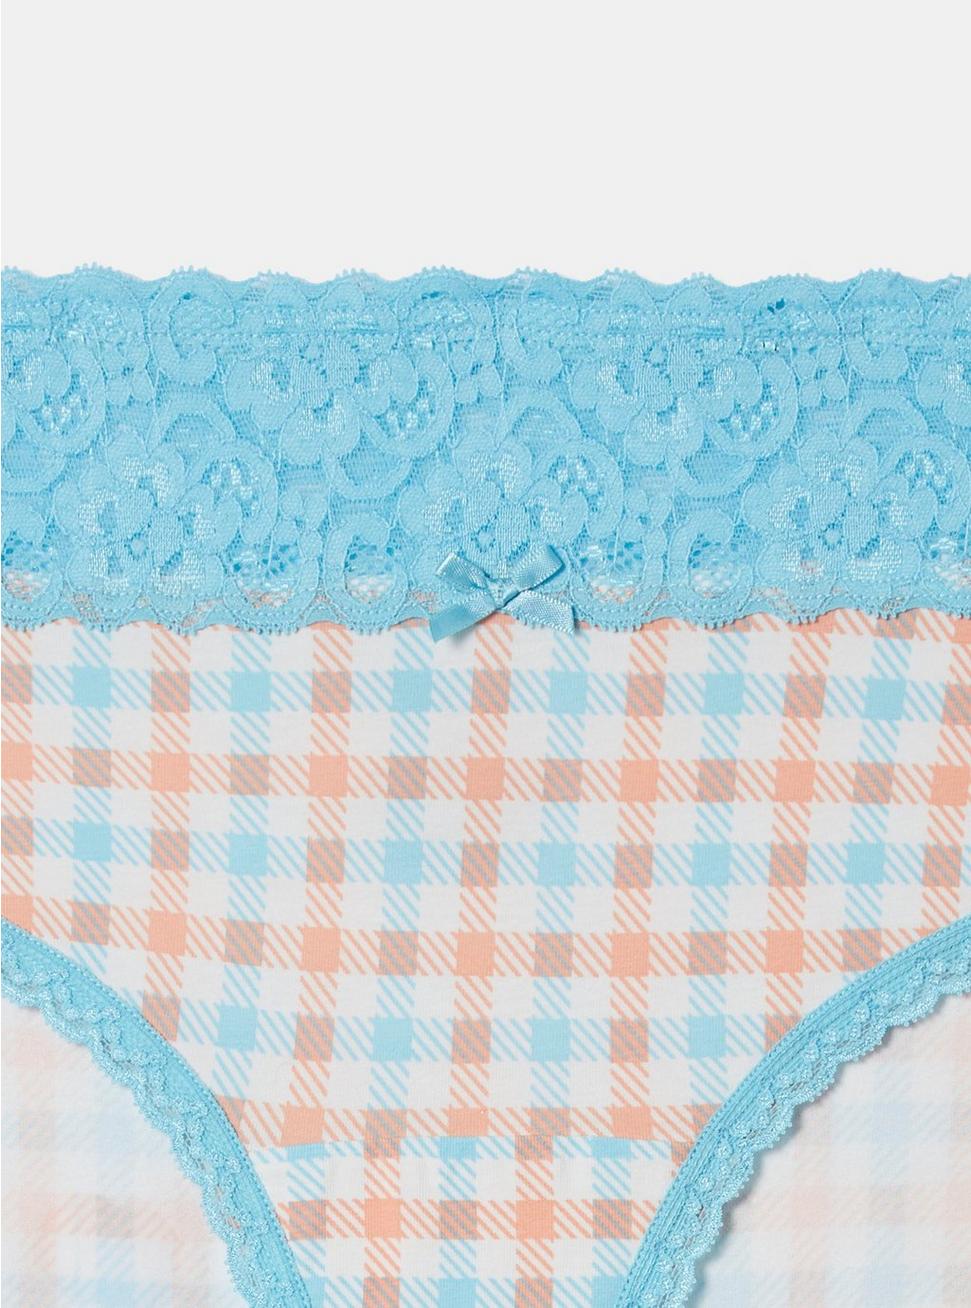 Plus Size Cotton Mid-Rise Hipster Lace Trim Panty, RASPBERRY GINGHAM BLUE, alternate